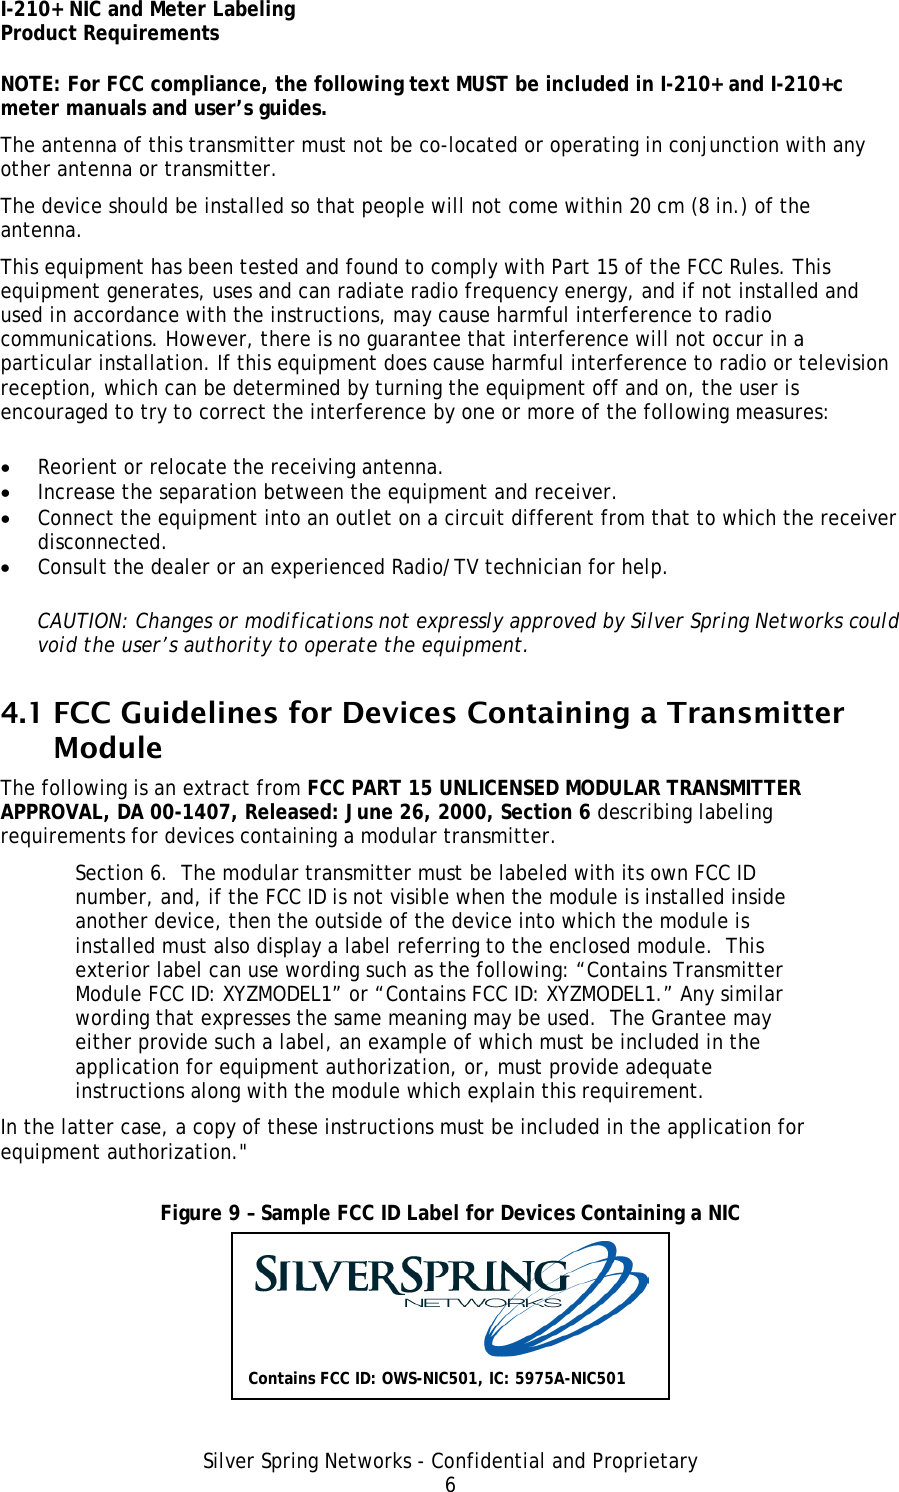 I-210+ NIC and Meter Labeling Product Requirements Silver Spring Networks - Confidential and Proprietary 6 NOTE: For FCC compliance, the following text MUST be included in I-210+ and I-210+c meter manuals and user’s guides. The antenna of this transmitter must not be co-located or operating in conjunction with any other antenna or transmitter. The device should be installed so that people will not come within 20 cm (8 in.) of the antenna. This equipment has been tested and found to comply with Part 15 of the FCC Rules. This equipment generates, uses and can radiate radio frequency energy, and if not installed and used in accordance with the instructions, may cause harmful interference to radio communications. However, there is no guarantee that interference will not occur in a particular installation. If this equipment does cause harmful interference to radio or television reception, which can be determined by turning the equipment off and on, the user is encouraged to try to correct the interference by one or more of the following measures: • Reorient or relocate the receiving antenna. • Increase the separation between the equipment and receiver. • Connect the equipment into an outlet on a circuit different from that to which the receiver disconnected. • Consult the dealer or an experienced Radio/TV technician for help. CAUTION: Changes or modifications not expressly approved by Silver Spring Networks could void the user’s authority to operate the equipment. 4.1 FCC Guidelines for Devices Containing a Transmitter Module The following is an extract from FCC PART 15 UNLICENSED MODULAR TRANSMITTER APPROVAL, DA 00-1407, Released: June 26, 2000, Section 6 describing labeling requirements for devices containing a modular transmitter. Section 6.  The modular transmitter must be labeled with its own FCC ID number, and, if the FCC ID is not visible when the module is installed inside another device, then the outside of the device into which the module is installed must also display a label referring to the enclosed module.  This exterior label can use wording such as the following: “Contains Transmitter Module FCC ID: XYZMODEL1” or “Contains FCC ID: XYZMODEL1.” Any similar wording that expresses the same meaning may be used.  The Grantee may either provide such a label, an example of which must be included in the application for equipment authorization, or, must provide adequate instructions along with the module which explain this requirement.  In the latter case, a copy of these instructions must be included in the application for equipment authorization.&quot;  Figure 9 – Sample FCC ID Label for Devices Containing a NIC  Contains FCC ID: OWS-NIC501, IC: 5975A-NIC501 